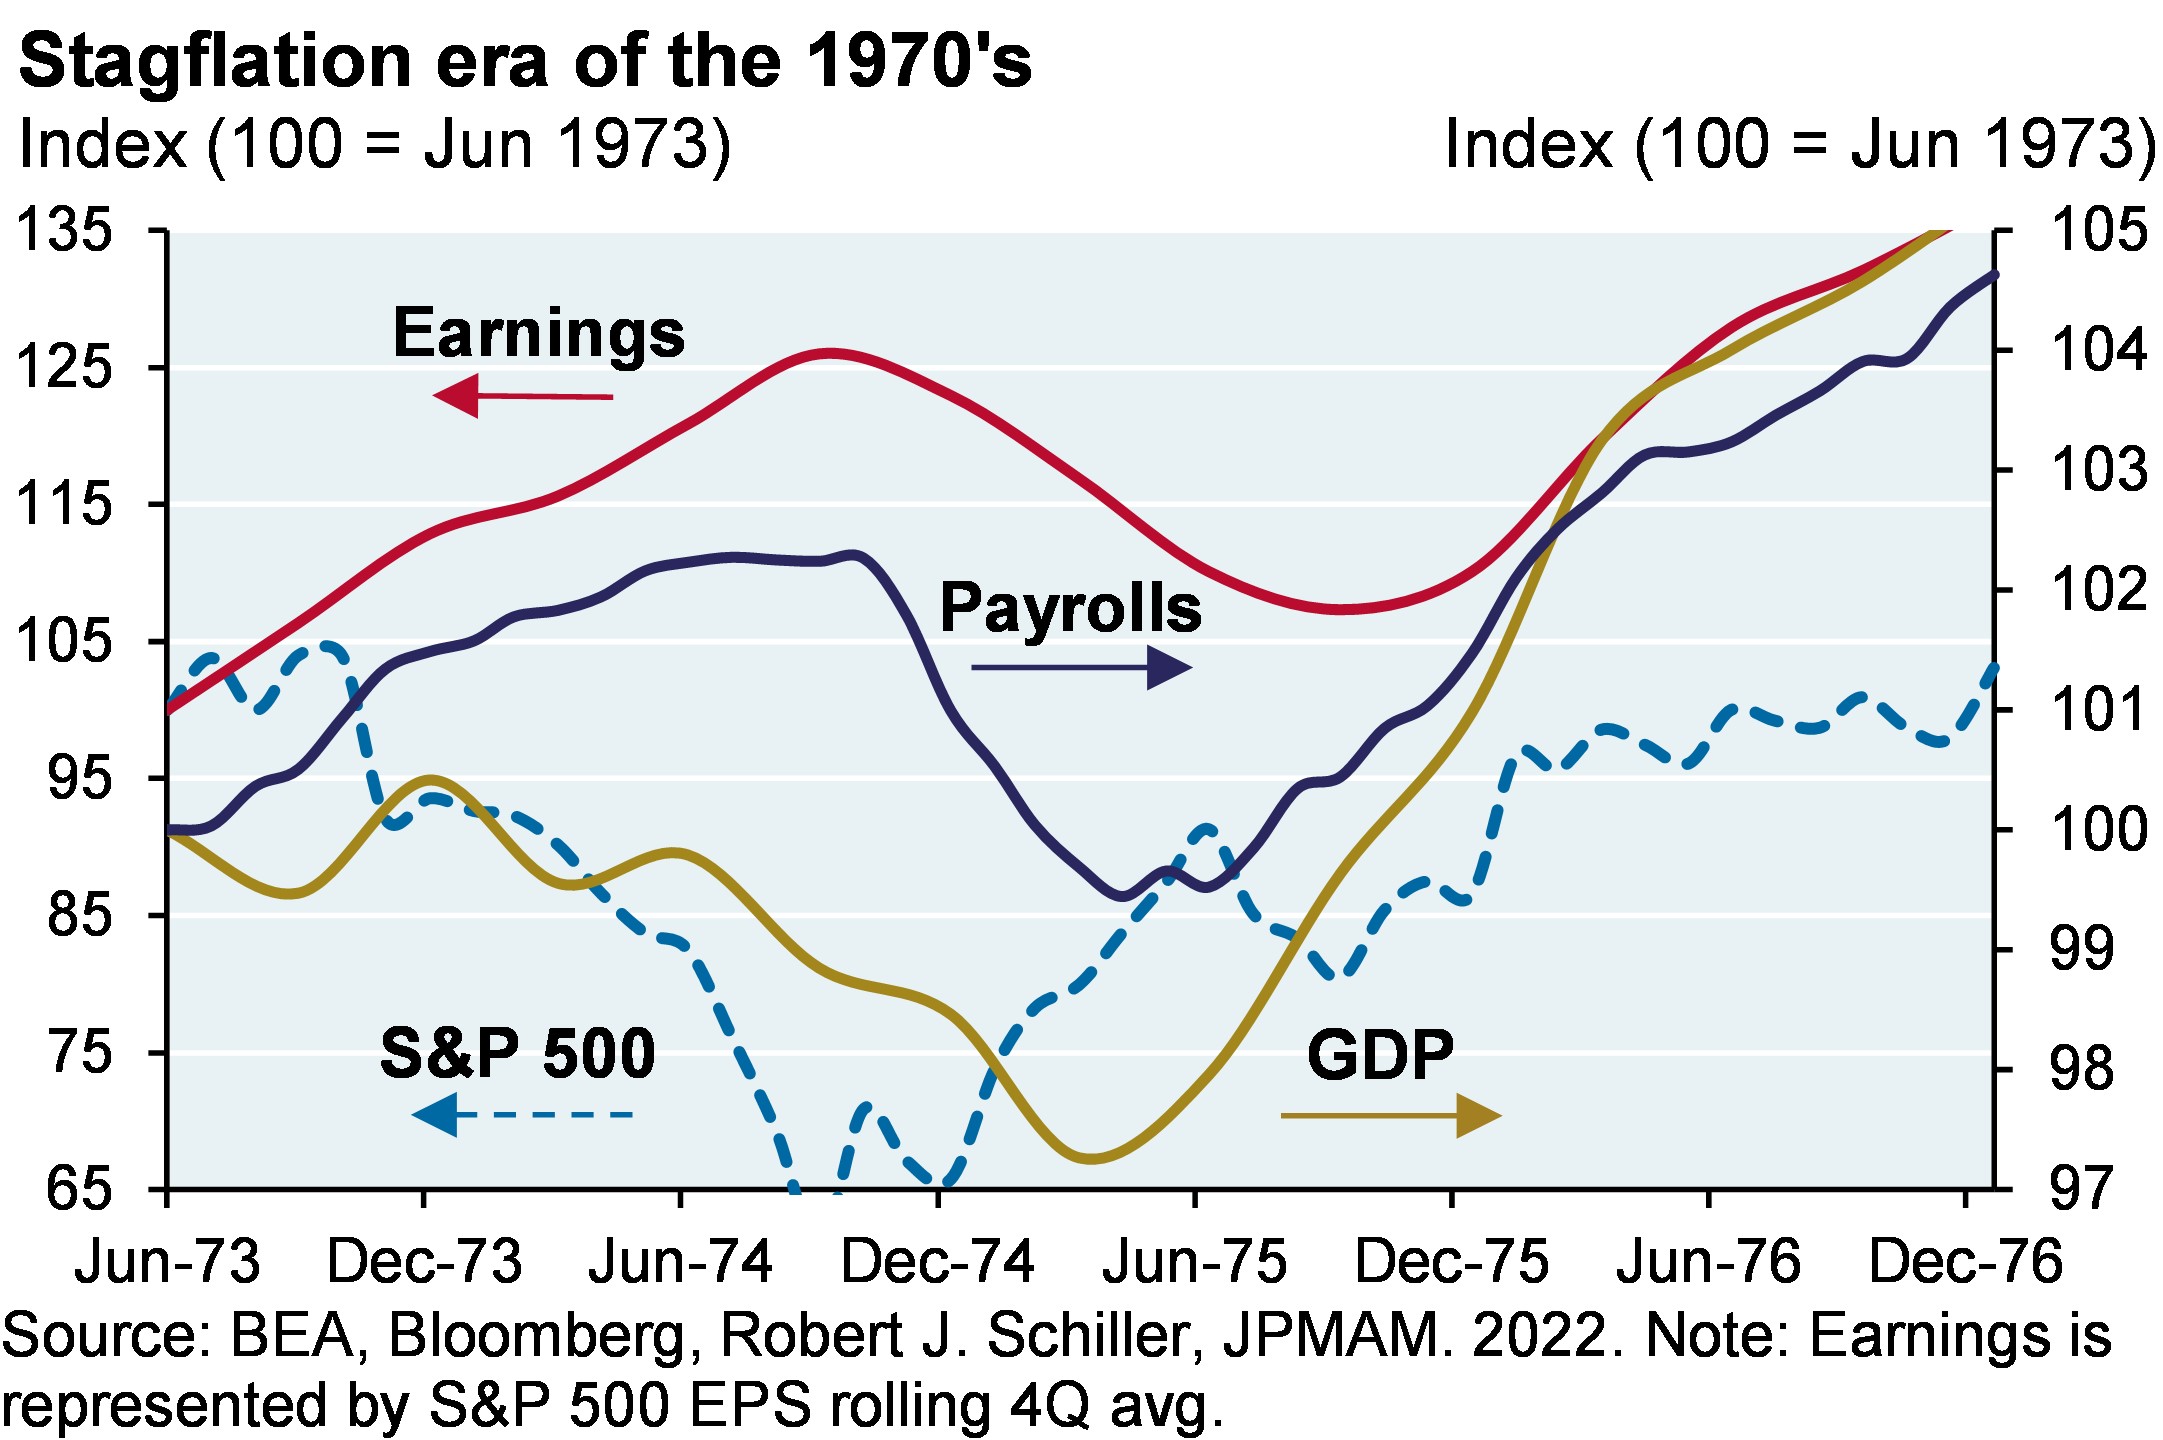 The indexed line chart compares the S&P 500, GDP, Earnings, and Nonfarm Payrolls throughout the Stagflation era recession from June 1973 to December 1976. The S&P 500 bottomed in December 1974, followed by GDP in March 1975, Payrolls in April 1975 and Earnings in September 1975. 